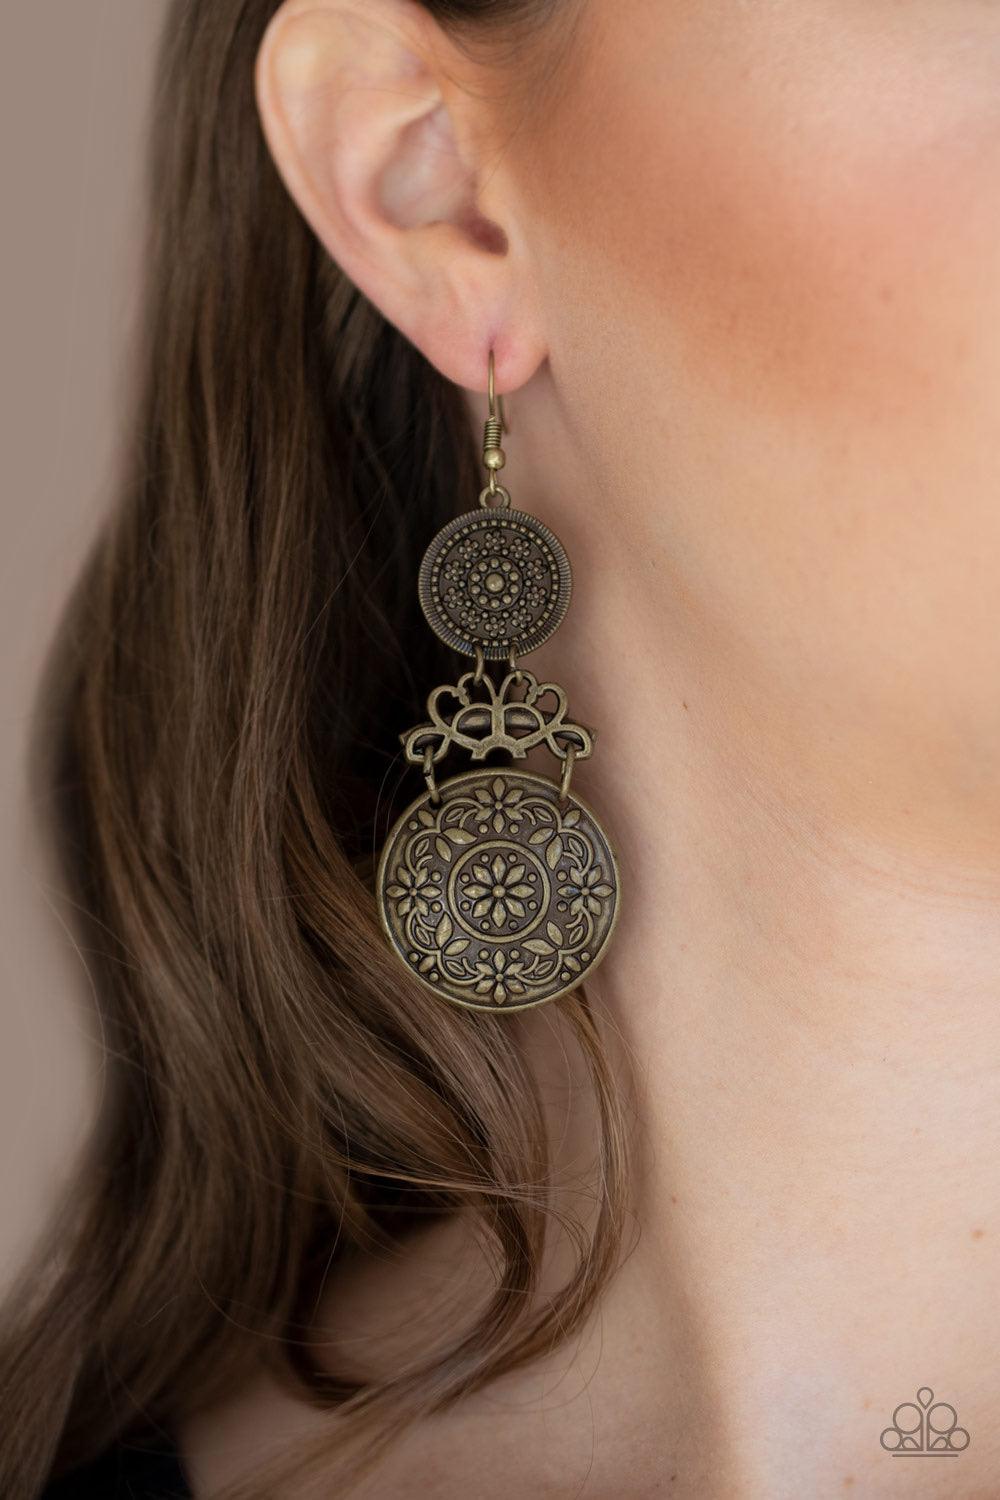 Paparazzi Accessories Garden Adventure - Brass Embossed and studded in antiqued floral patterns, flowery brass discs flank a vine-like brass fitting, coalescing into a whimsical lure. Earring attaches to a standard fishhook fitting. Jewelry